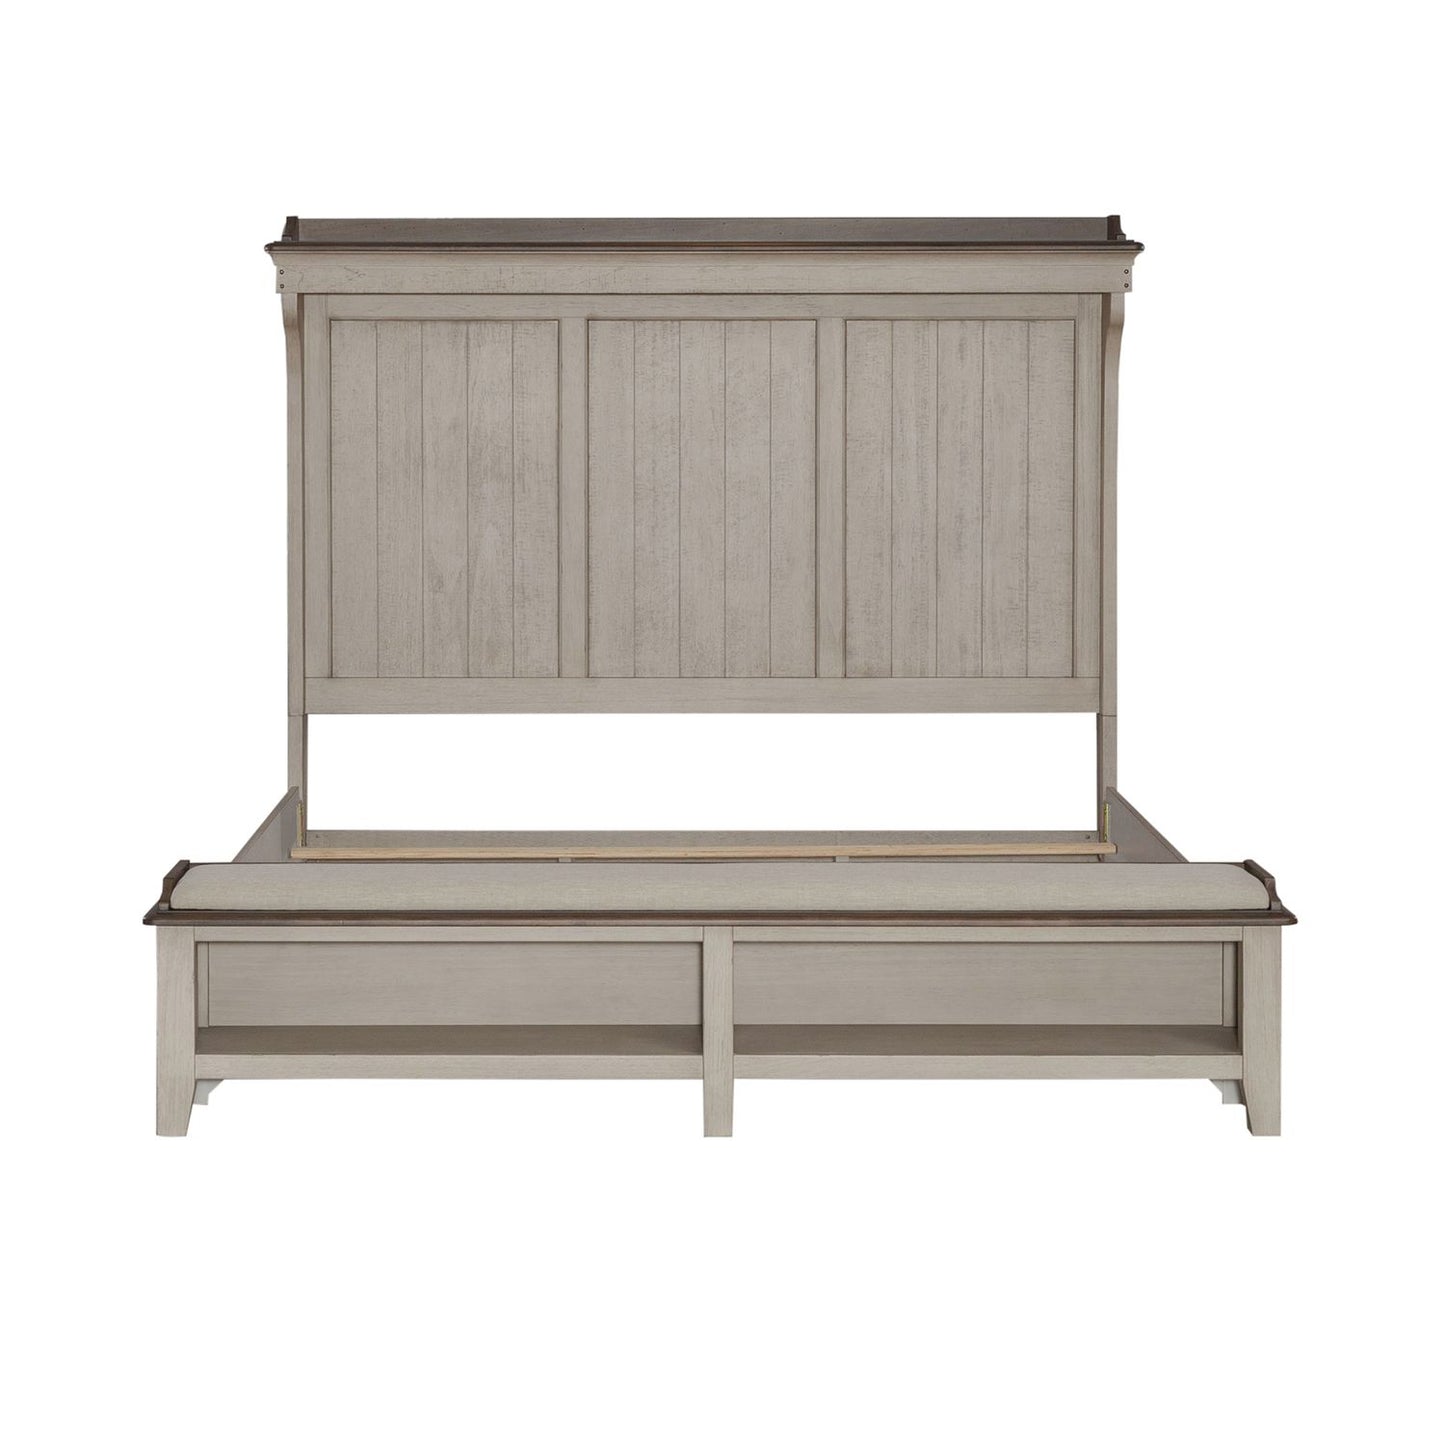 Ivy Hollow - King Mantle Storage Bed